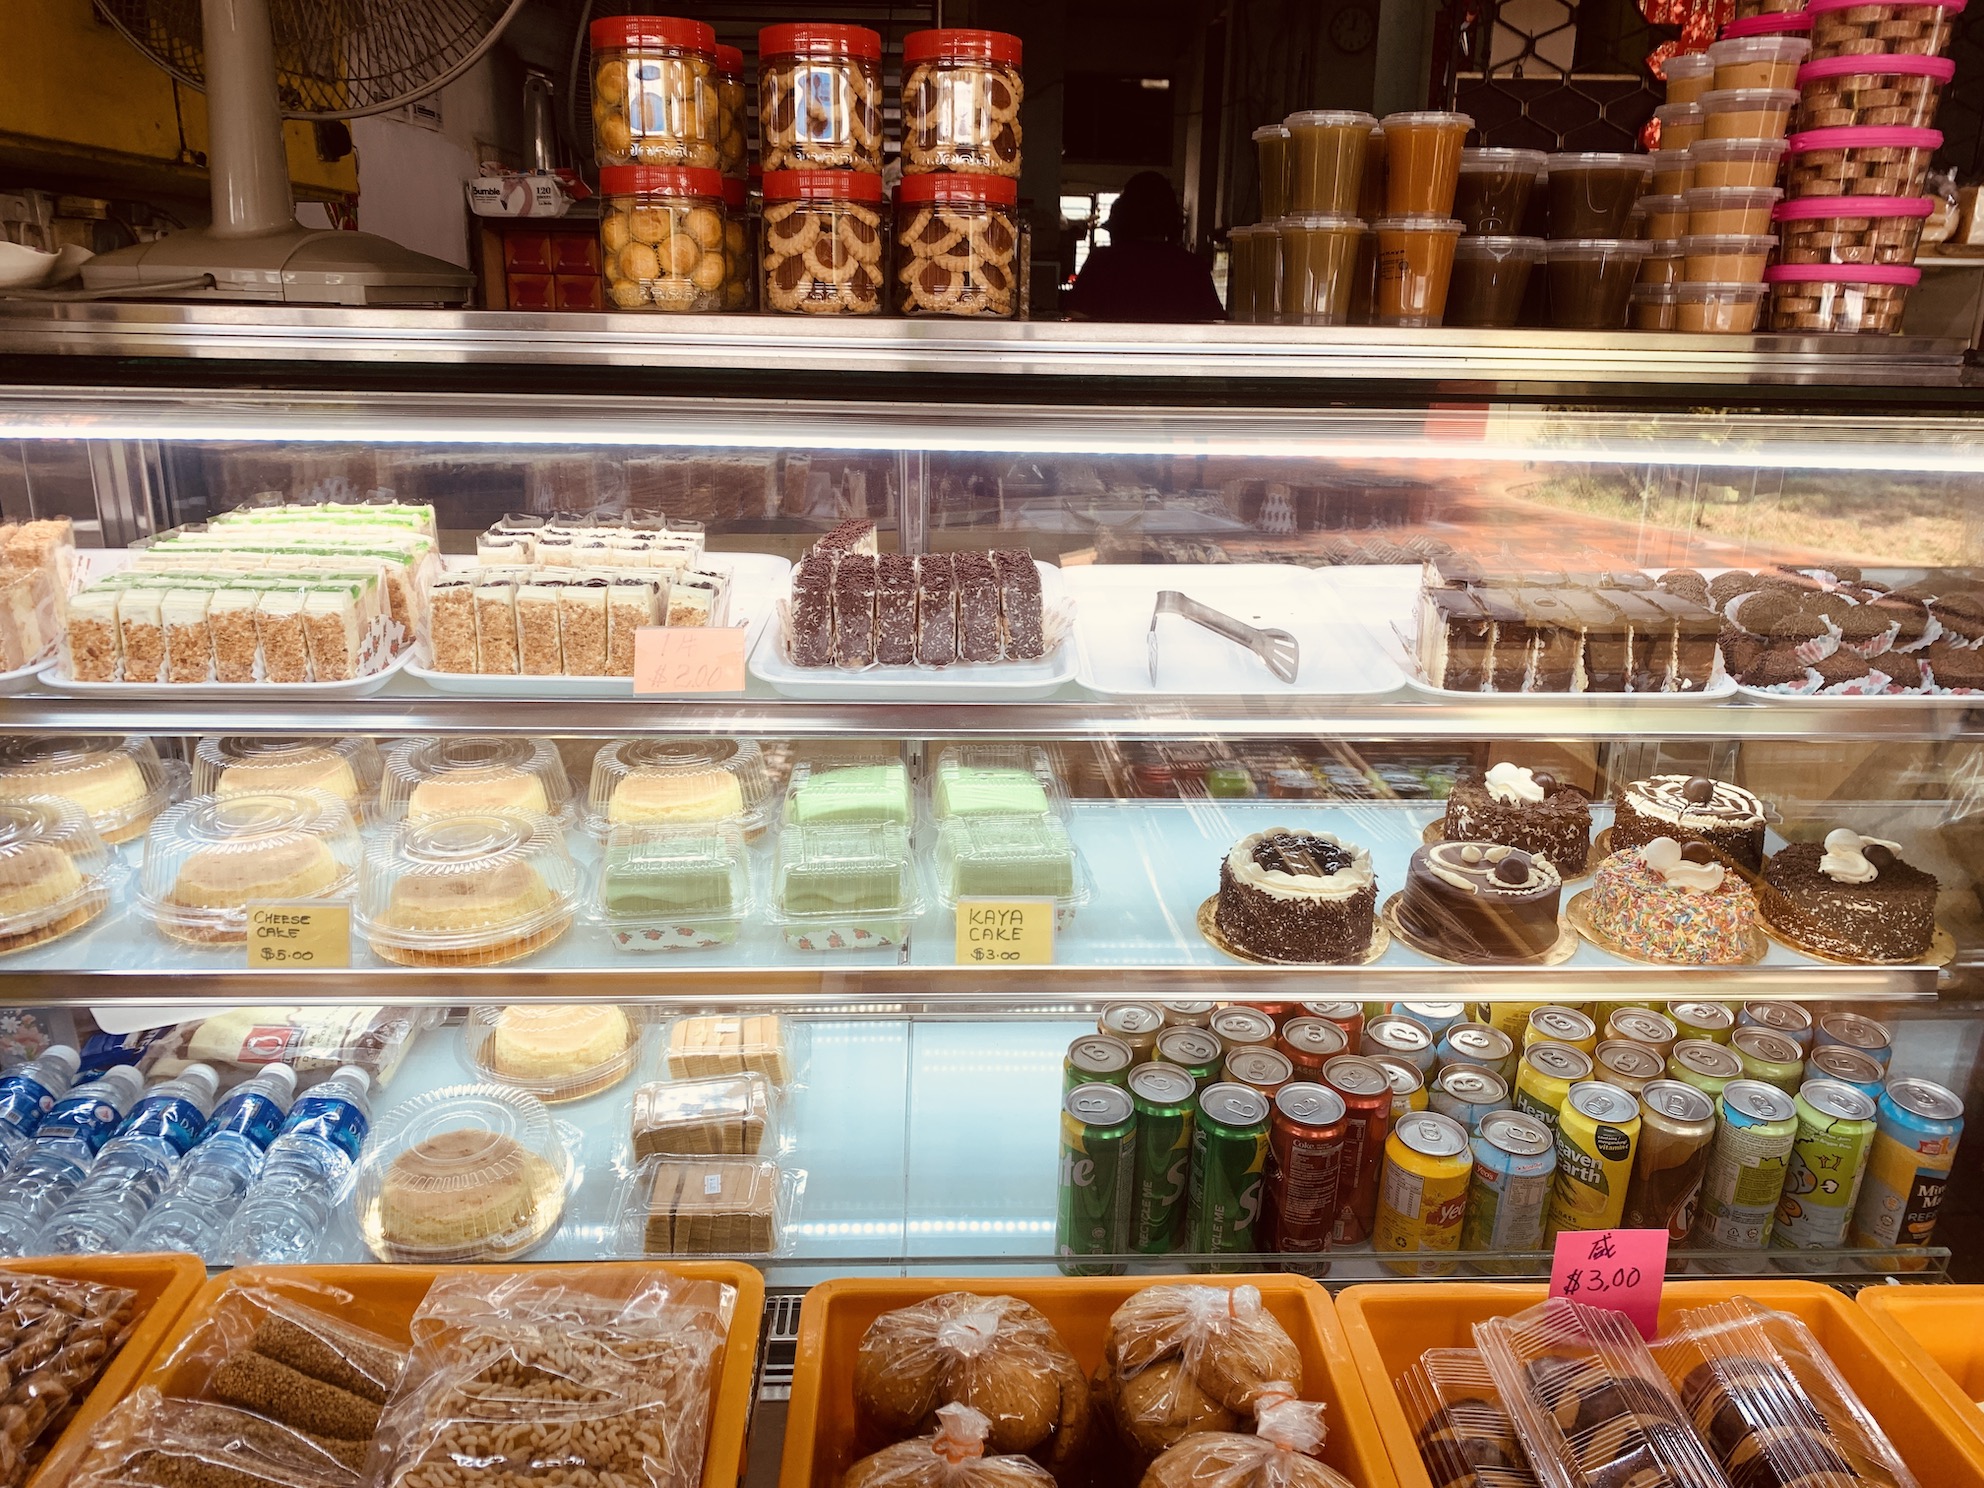 Hong Yit Bakery & Confectionery - Western Cakes 1